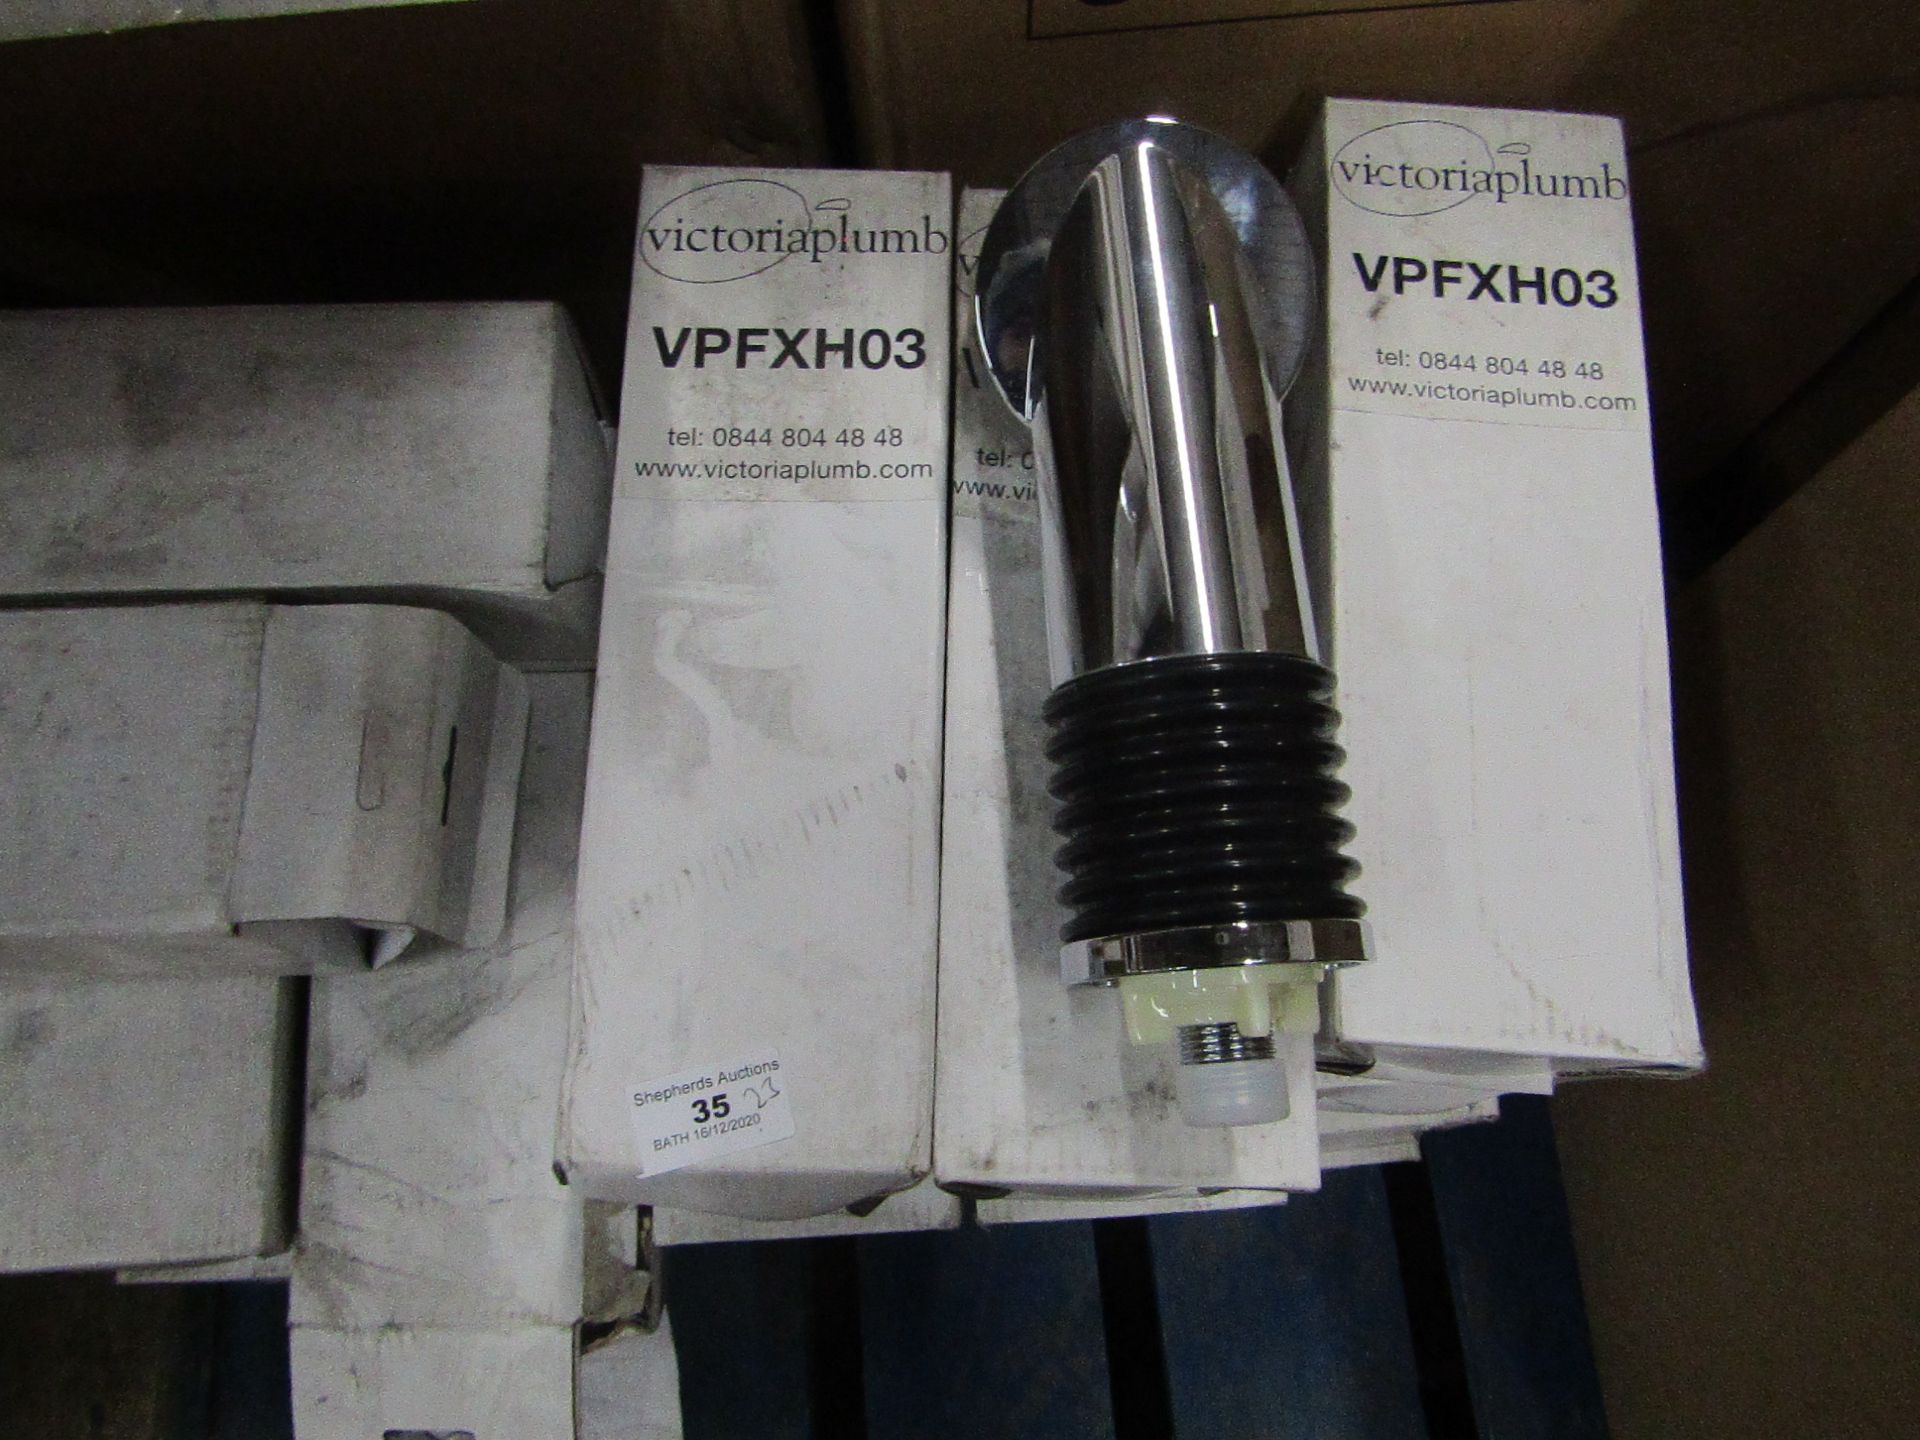 Approx 19x Victoria Plumb shower heads, new and boxed.